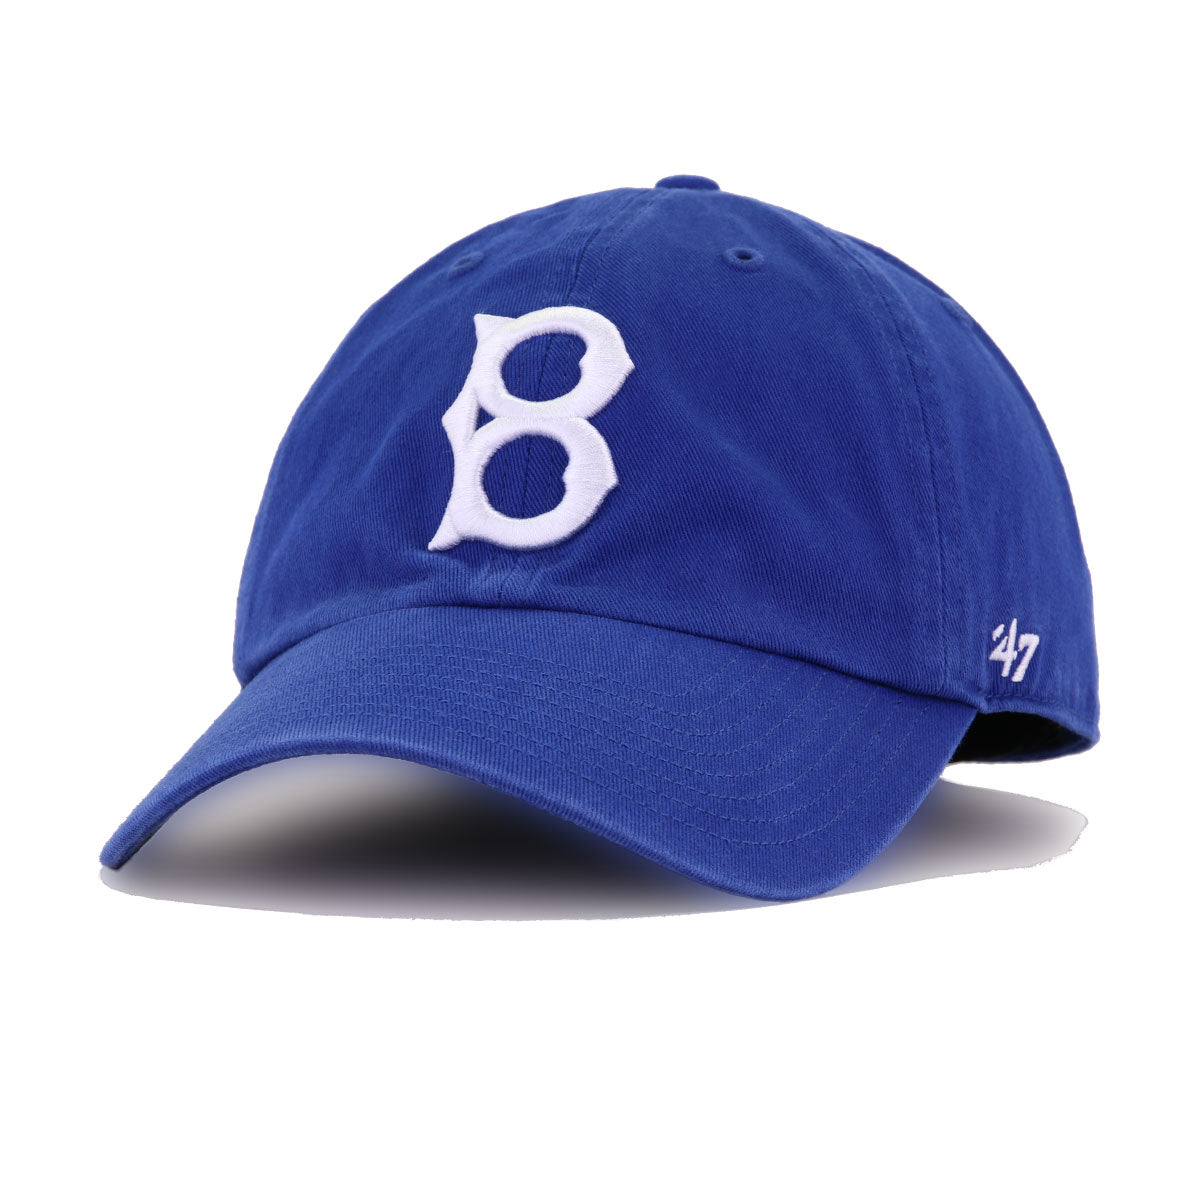 47 Brand Los Angeles Brooklyn Dodgers Cooperstown Royal Clean Up Hat Nwt